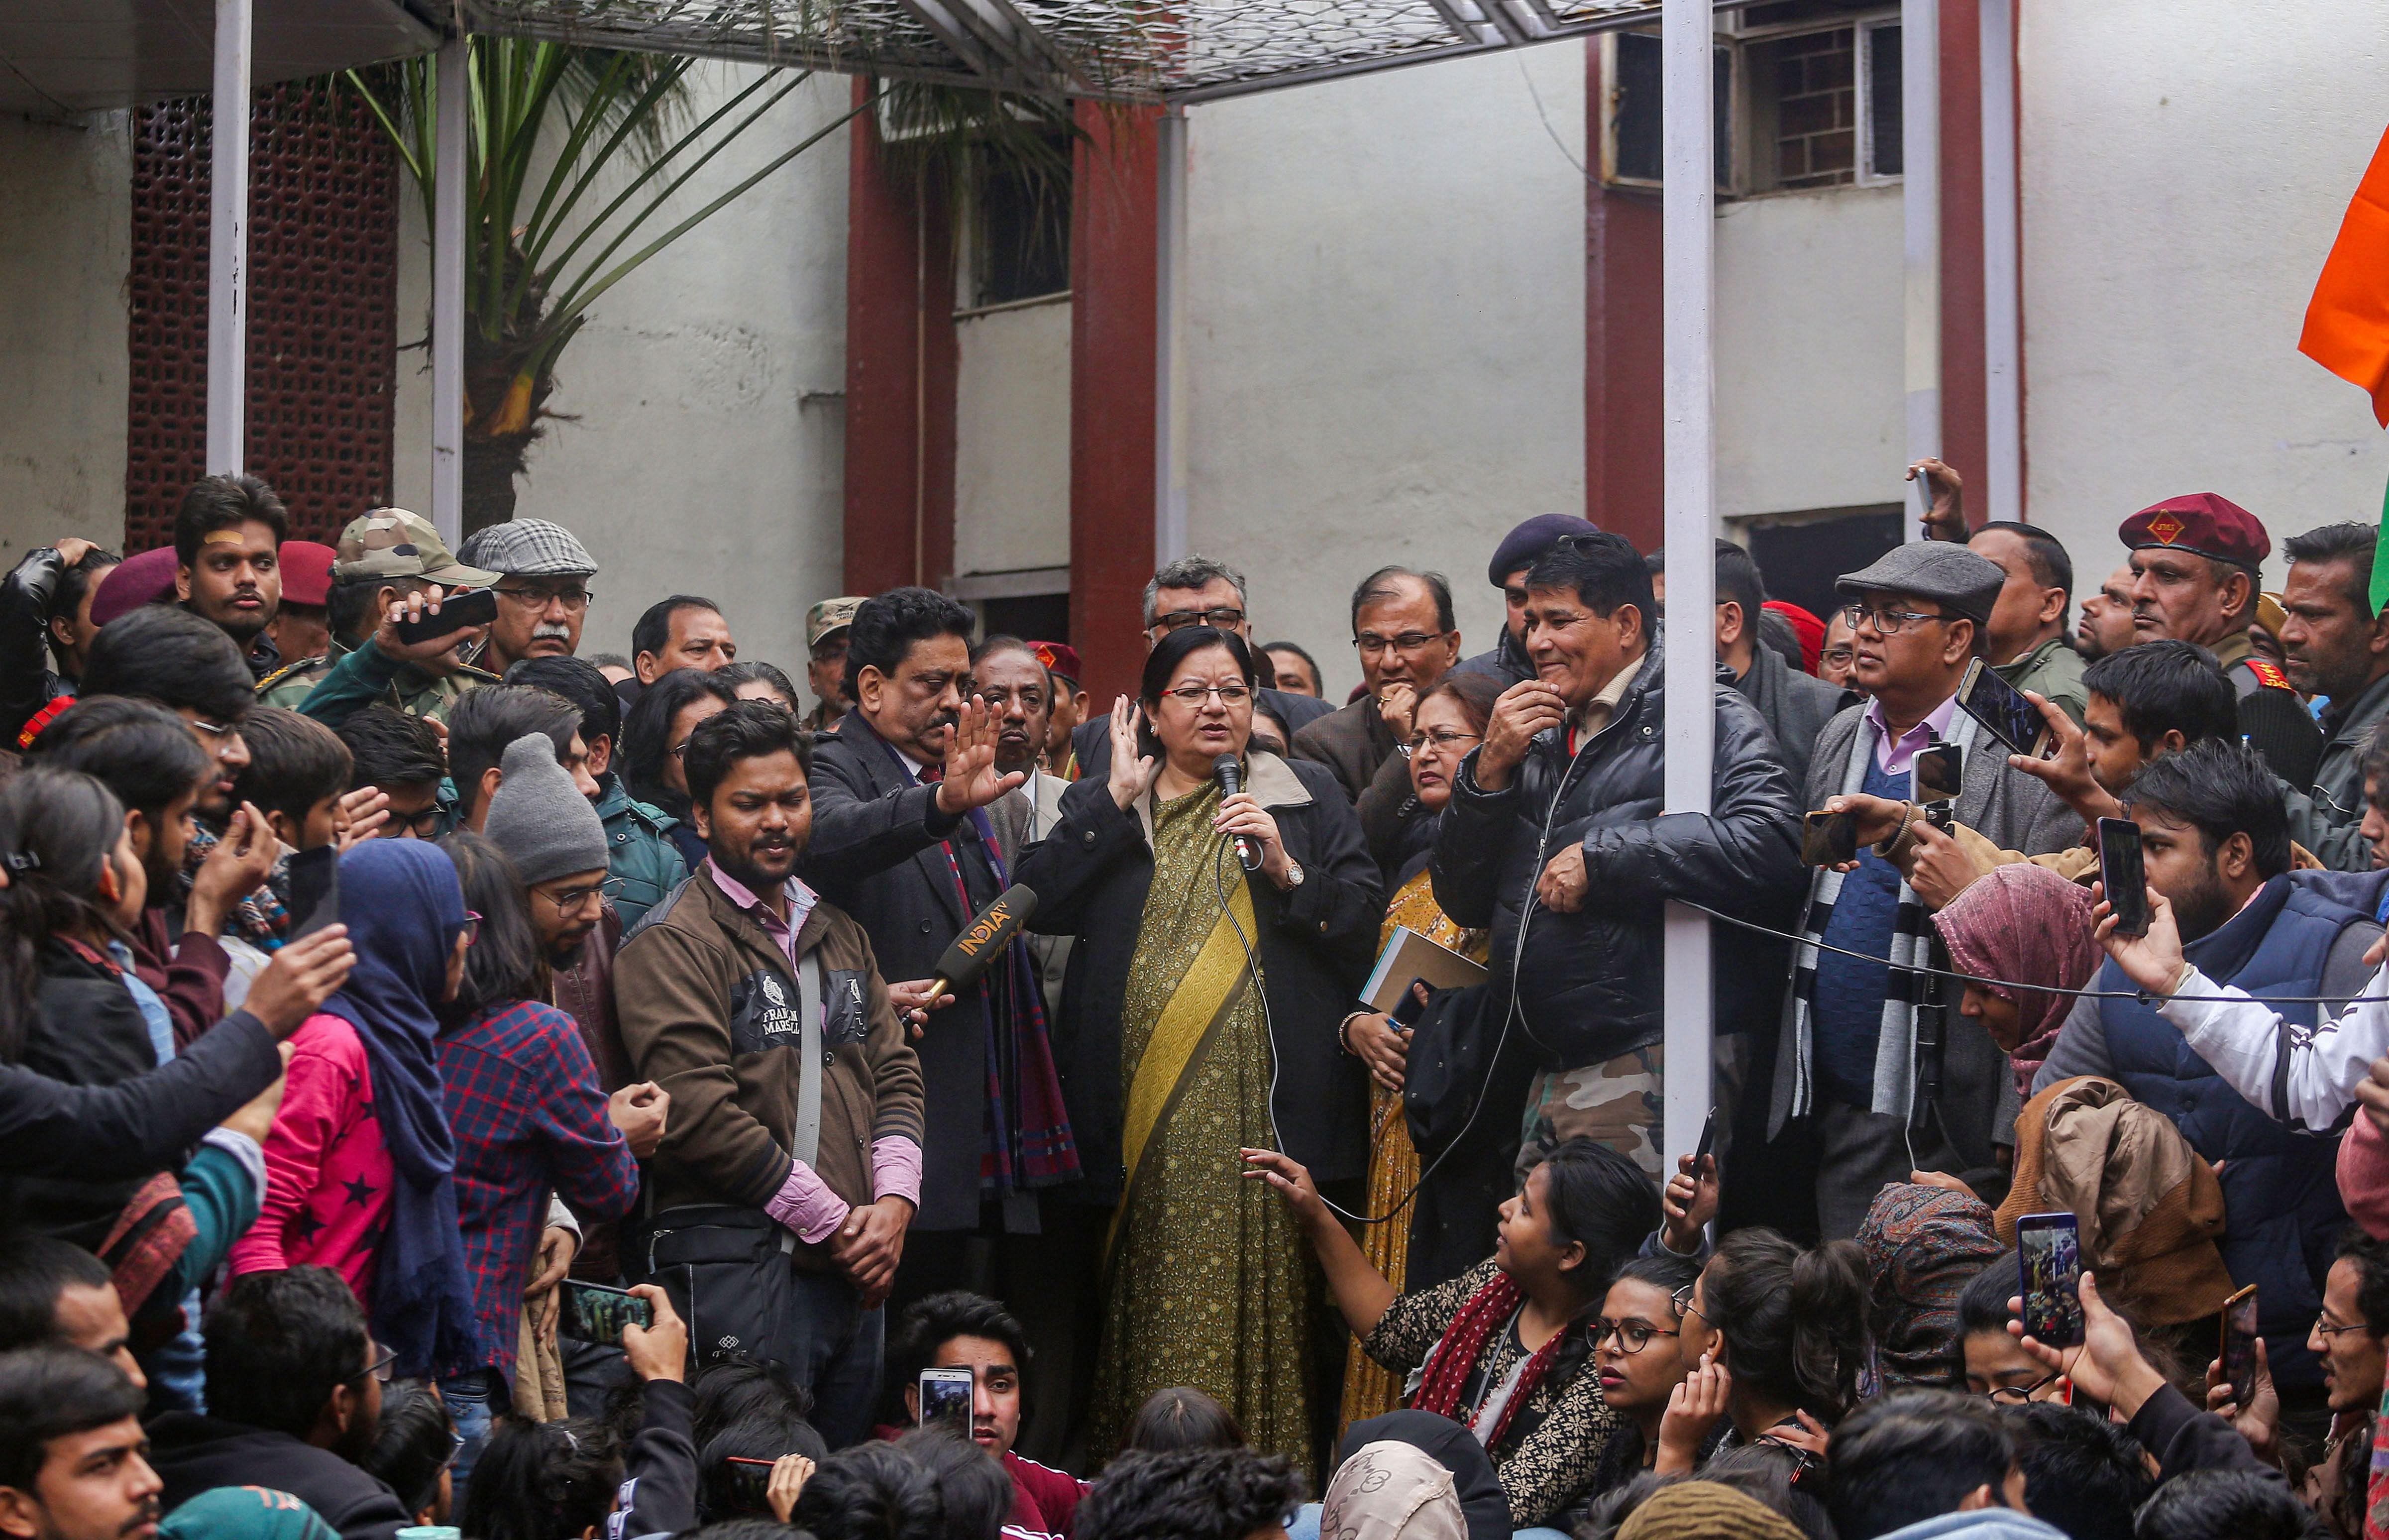 Jamia Millia Islamia VC Najma Akhtar addresses protesting students who were demanding registration of a FIR against the "police brutality" on campus last month, at Jamia campus in New Delhi, Monday, Jan. 13, 2020. (PTI Photo)